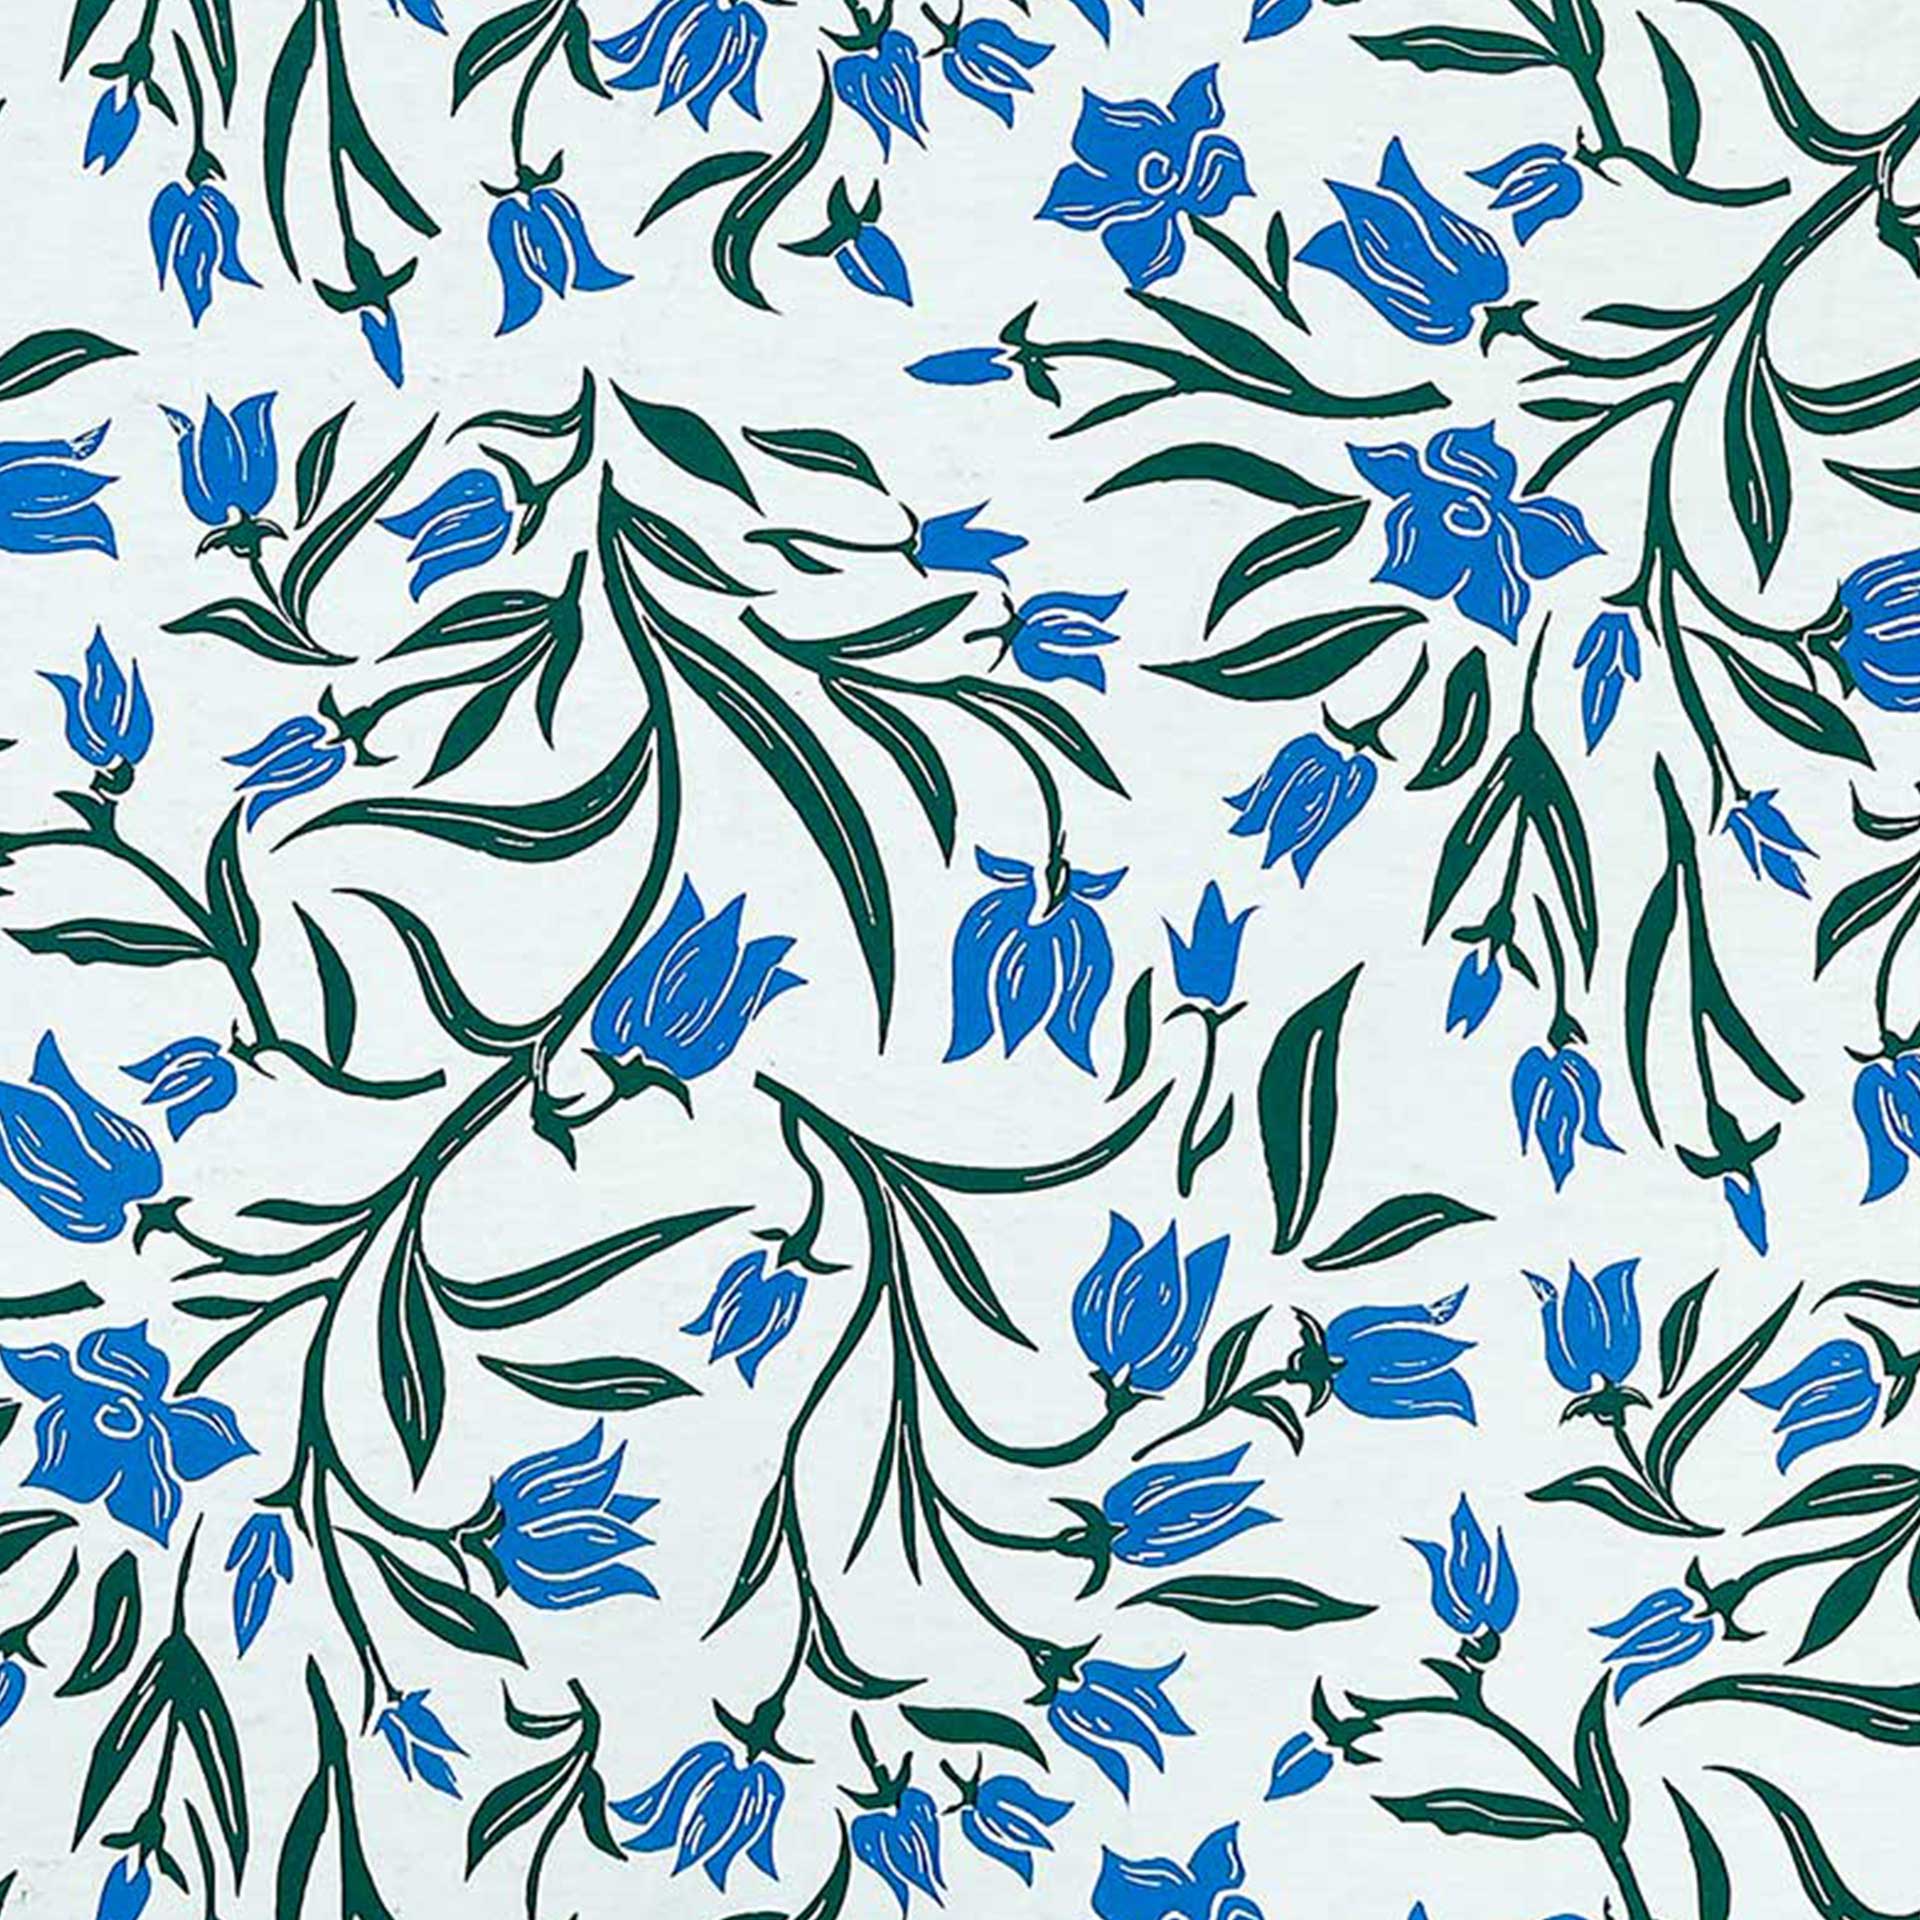 Closeup of a blue and green floral pattern